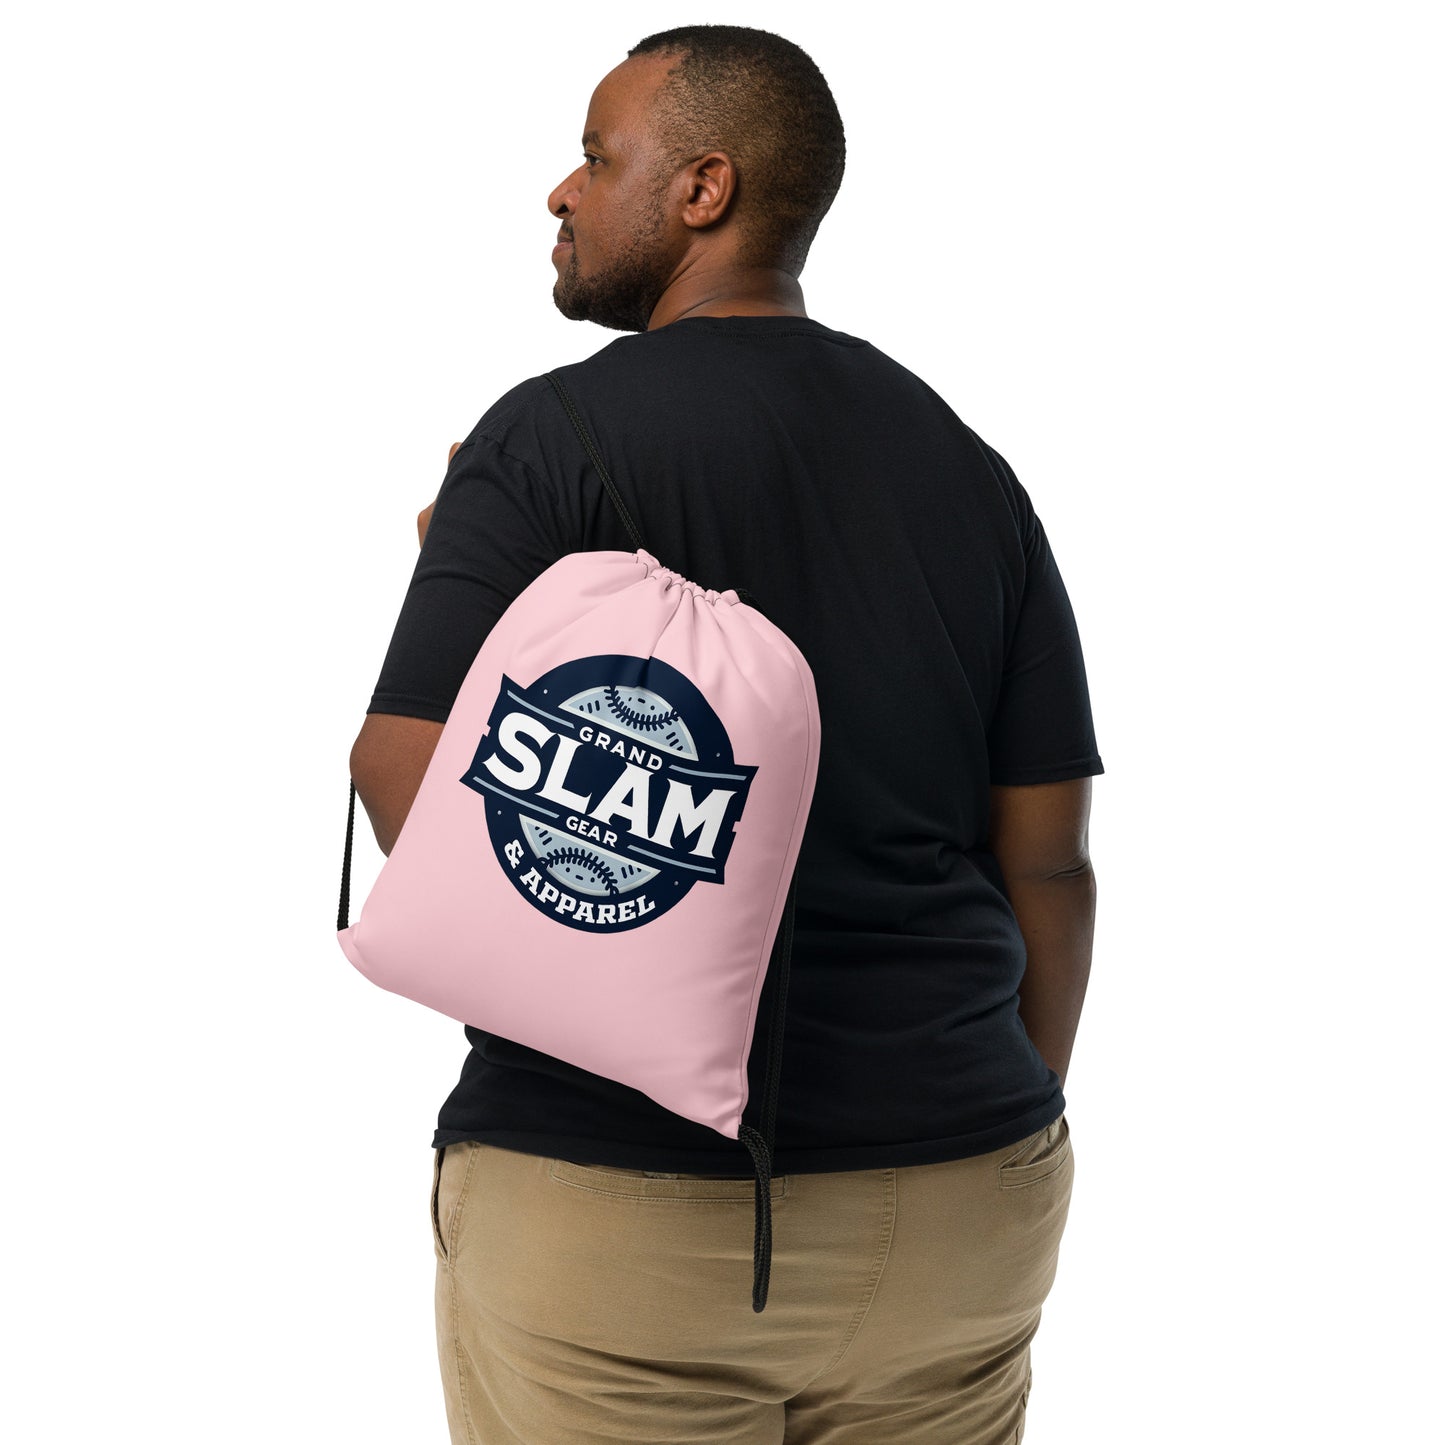 Grand Slam Gear Vibrant Drawstring Bag Pink - Sporty Style Meets Functionality